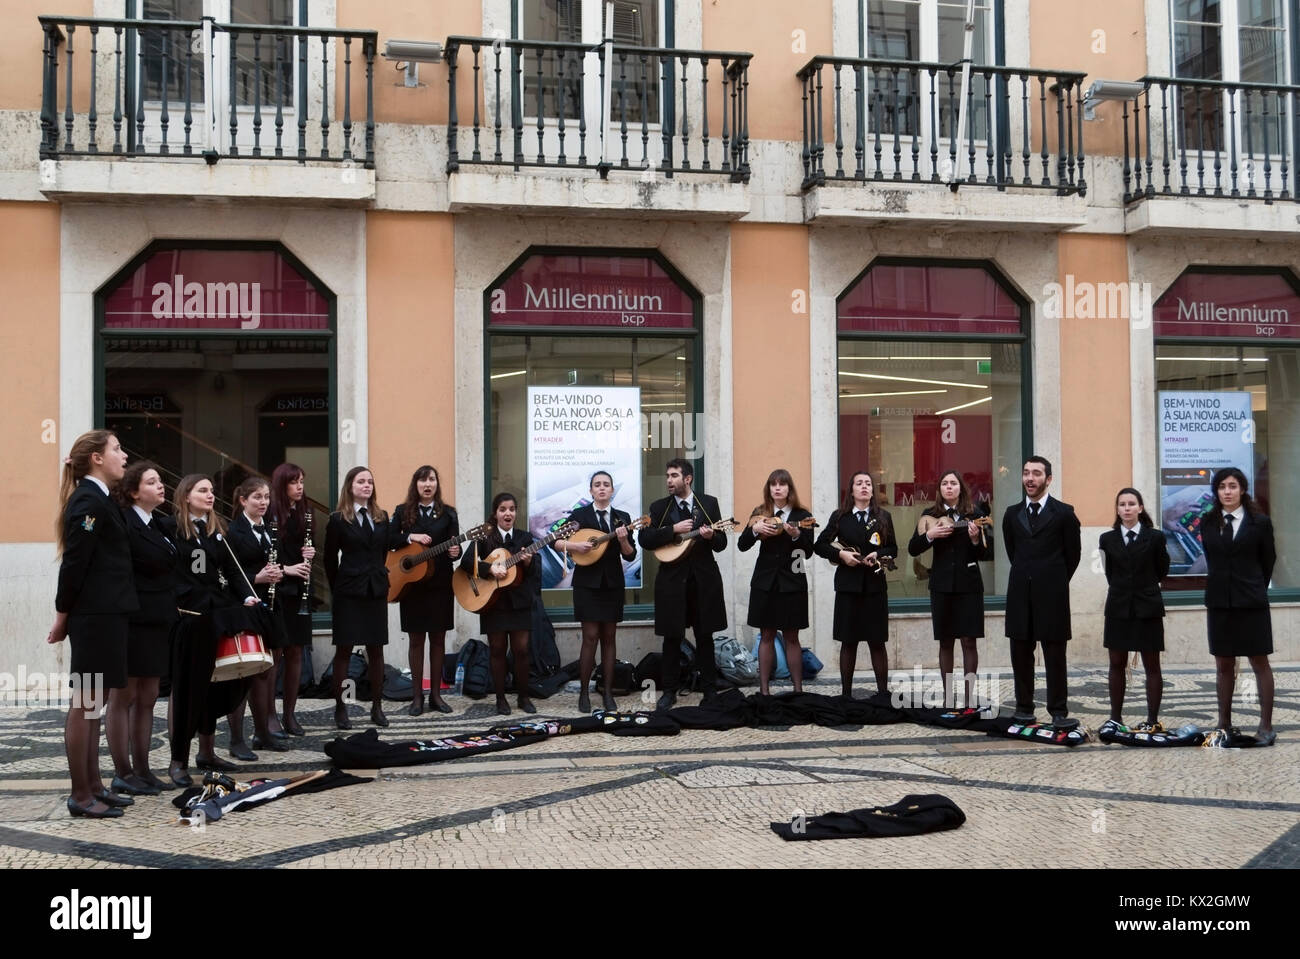 University students singing and playing in the street, Lisbon, Portugal Stock Photo